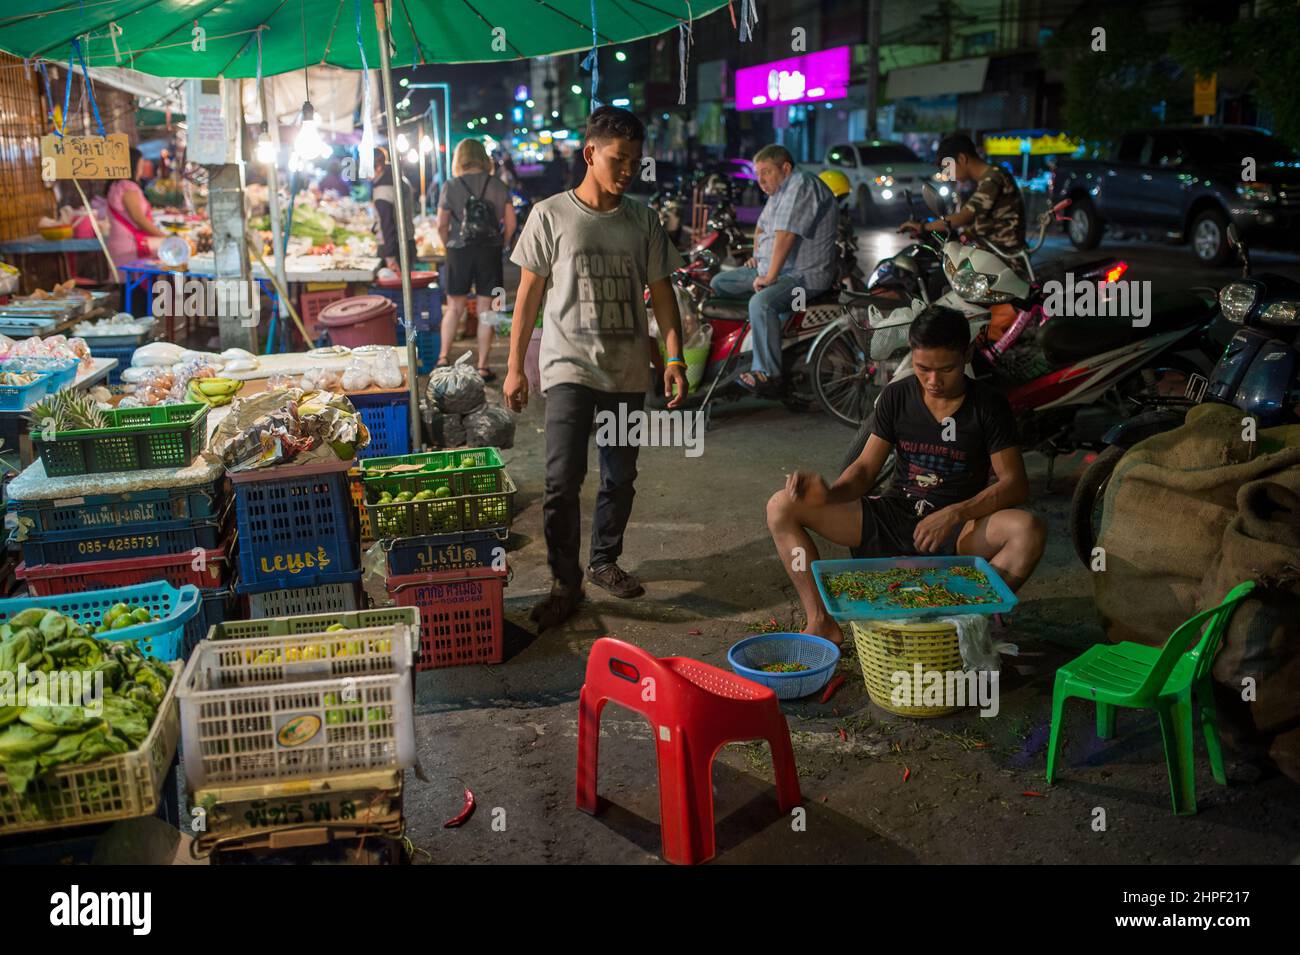 Urban scene from the famous night market in Hua Hin. Hua Hin is one of the most popular travel destinations in Thailand. Stock Photo